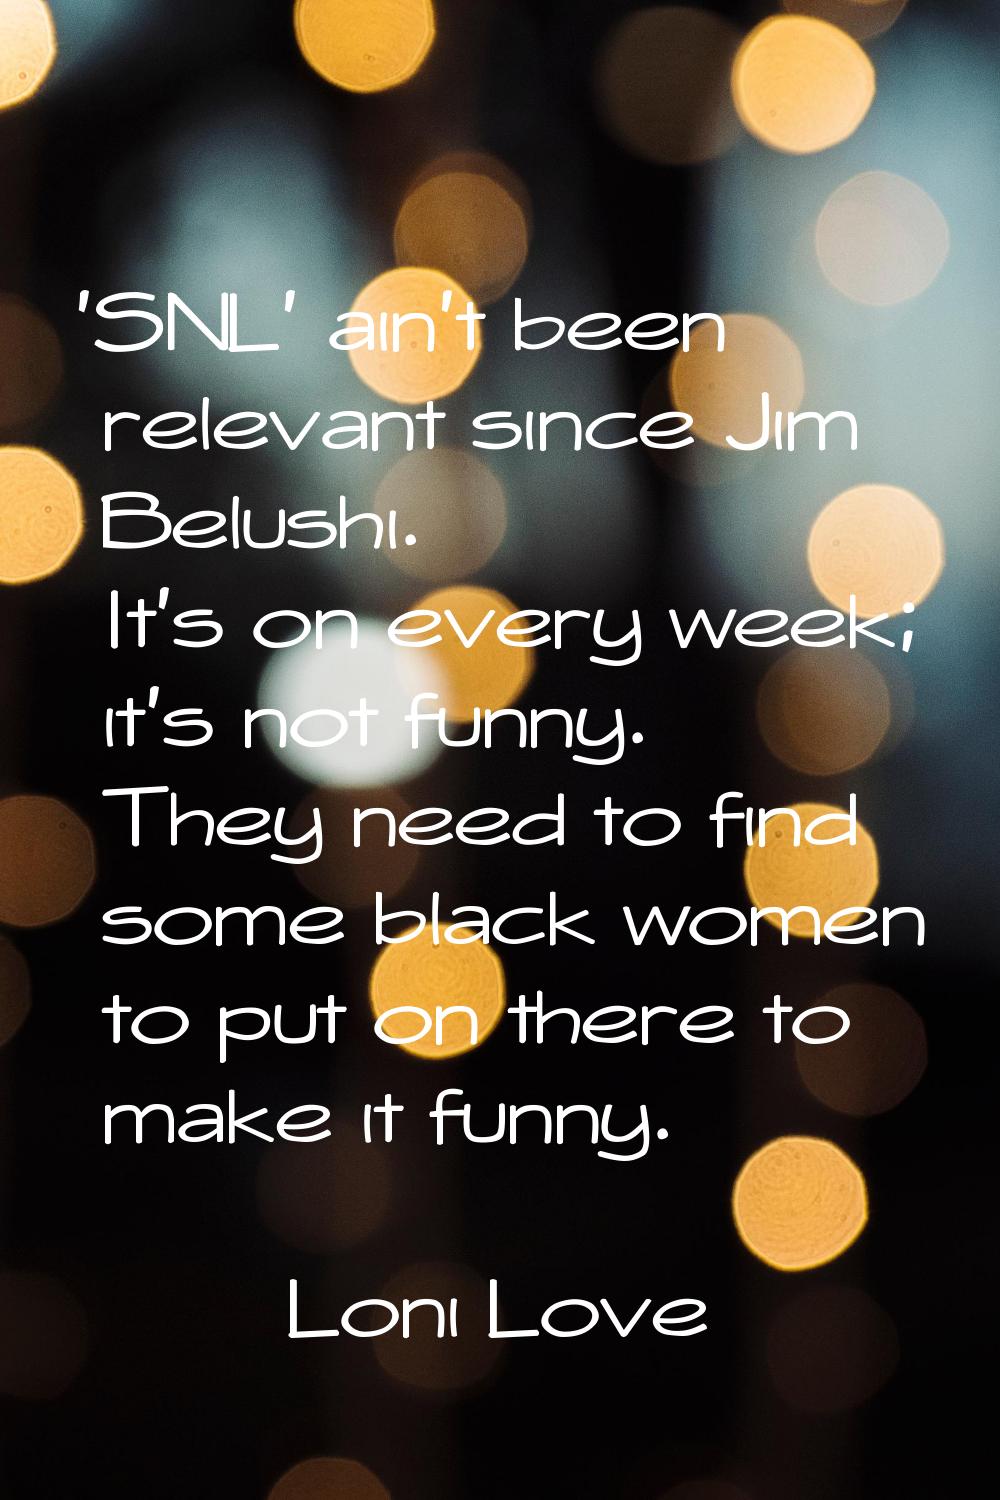 'SNL' ain't been relevant since Jim Belushi. It's on every week; it's not funny. They need to find 